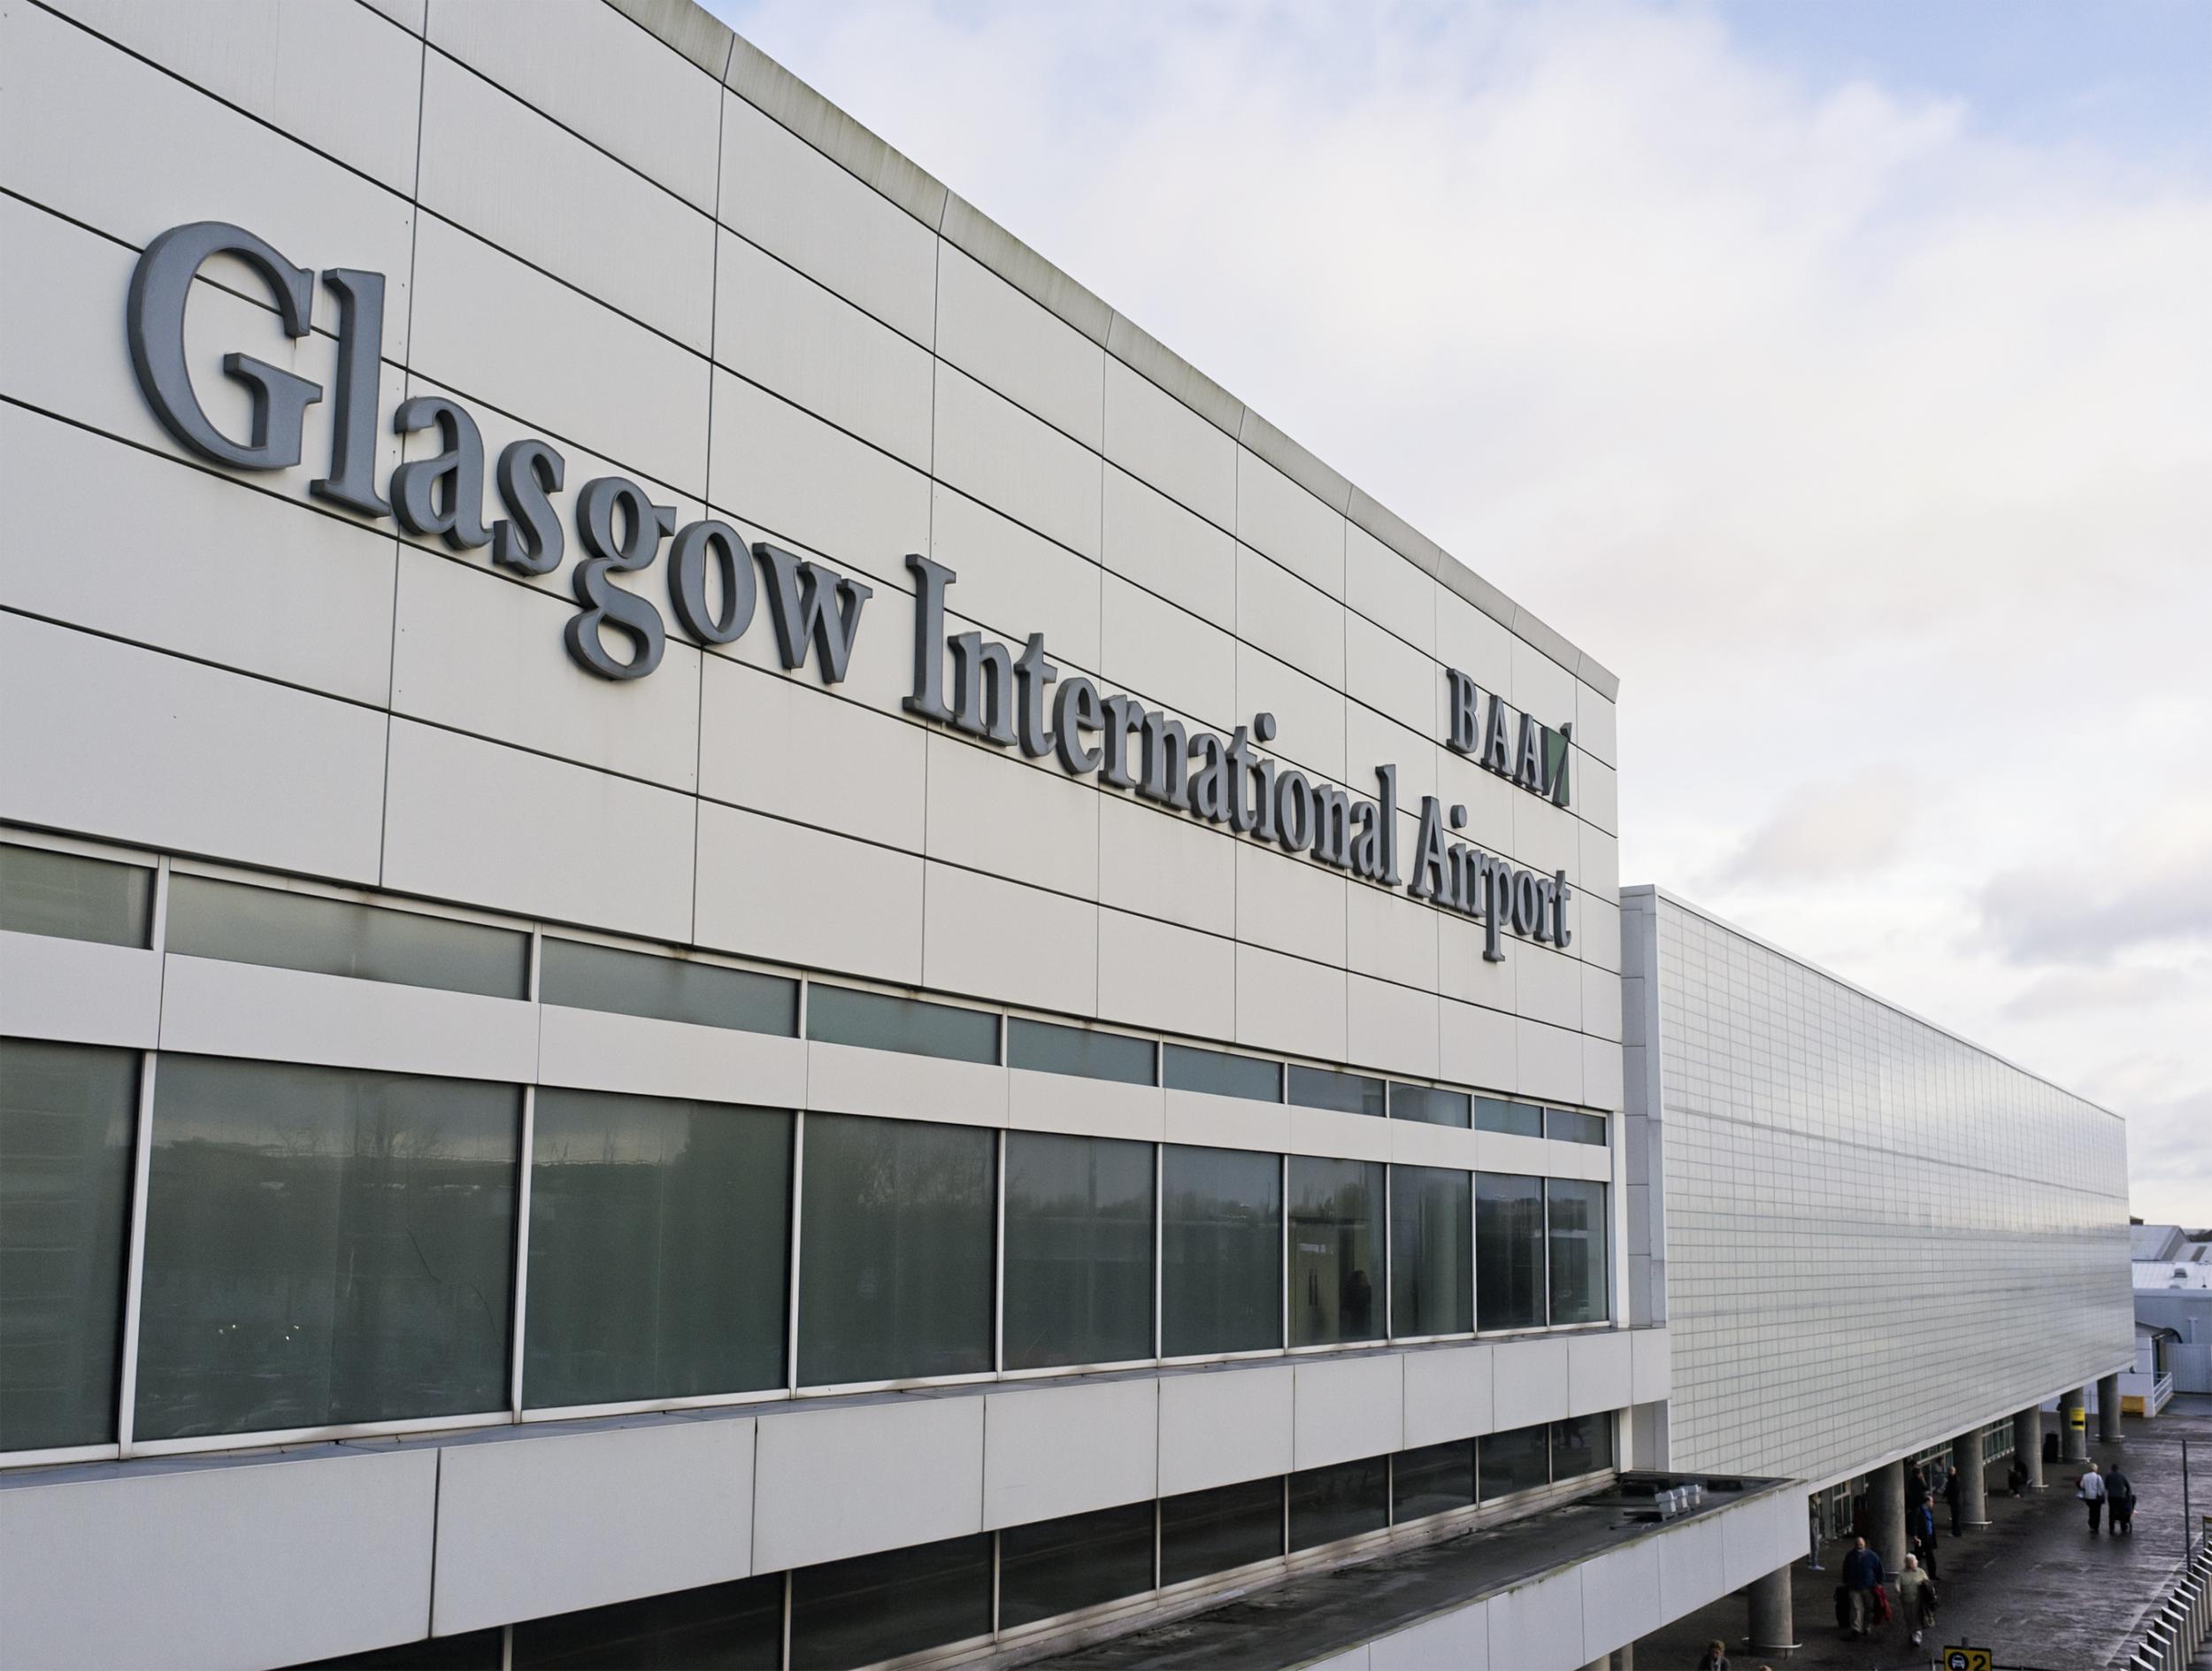 Glasgow airport strikes: When are they, why are staff striking and how